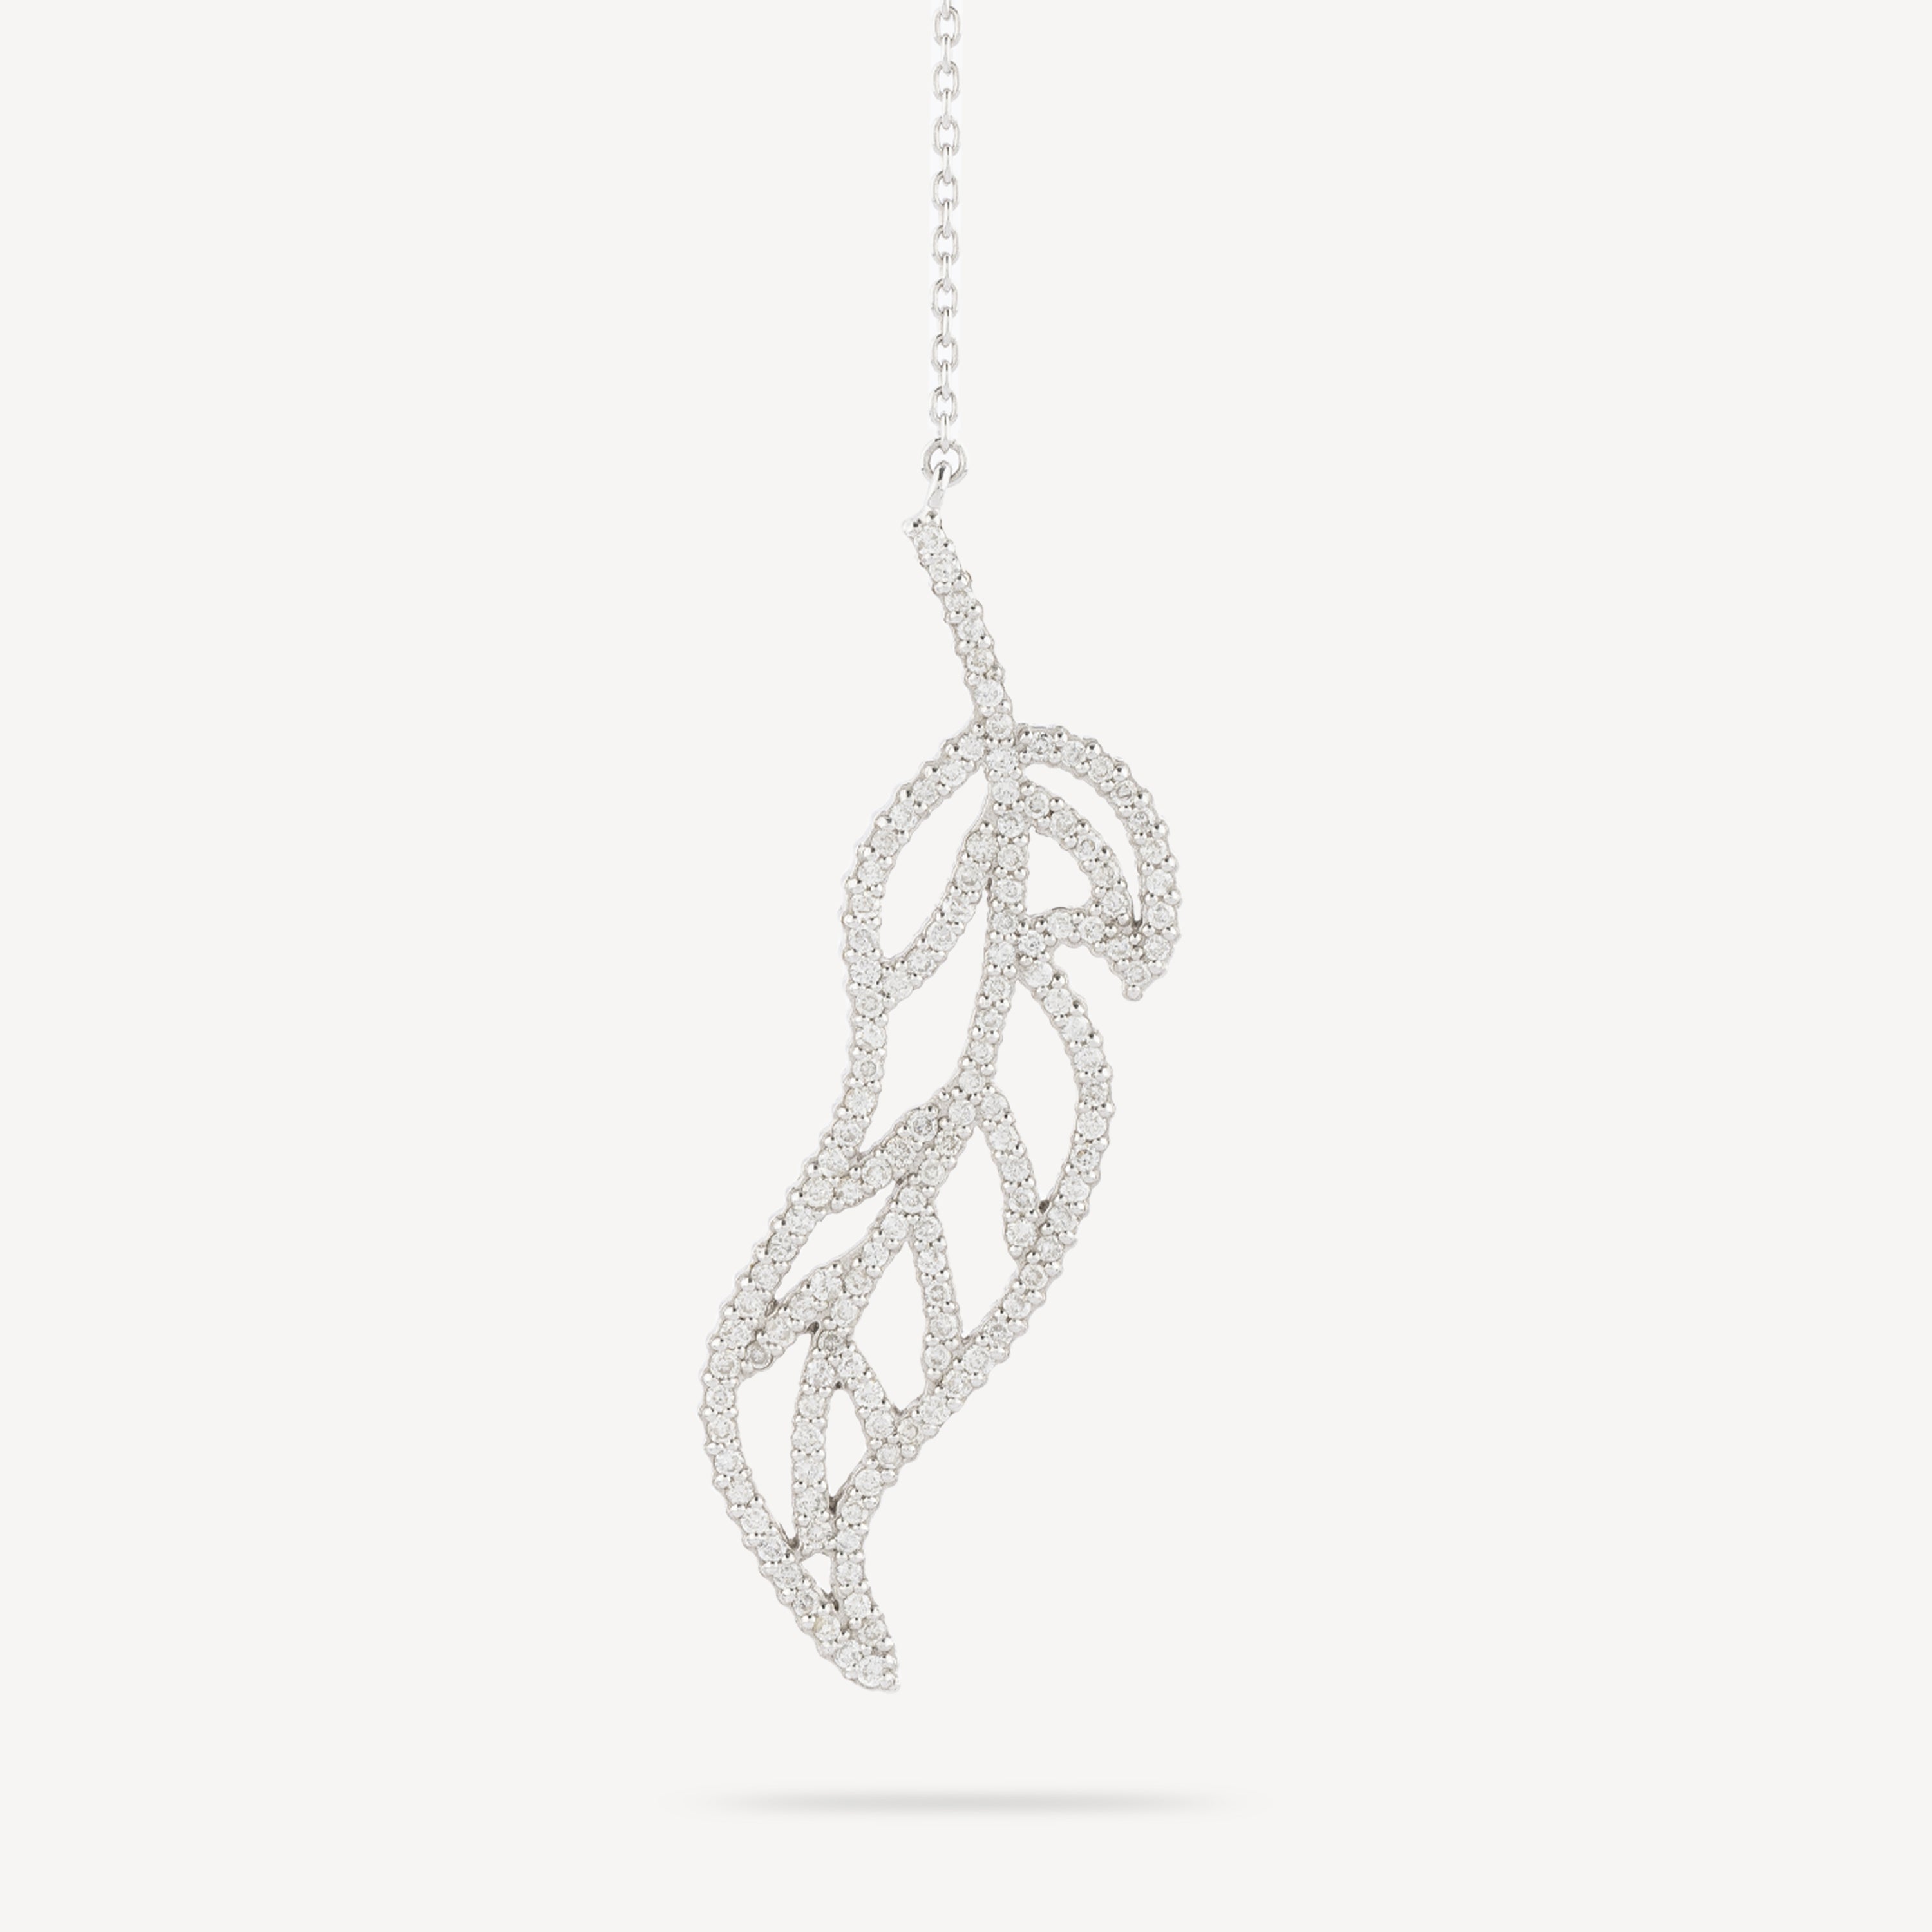 Collier pendentif feuille or blanc